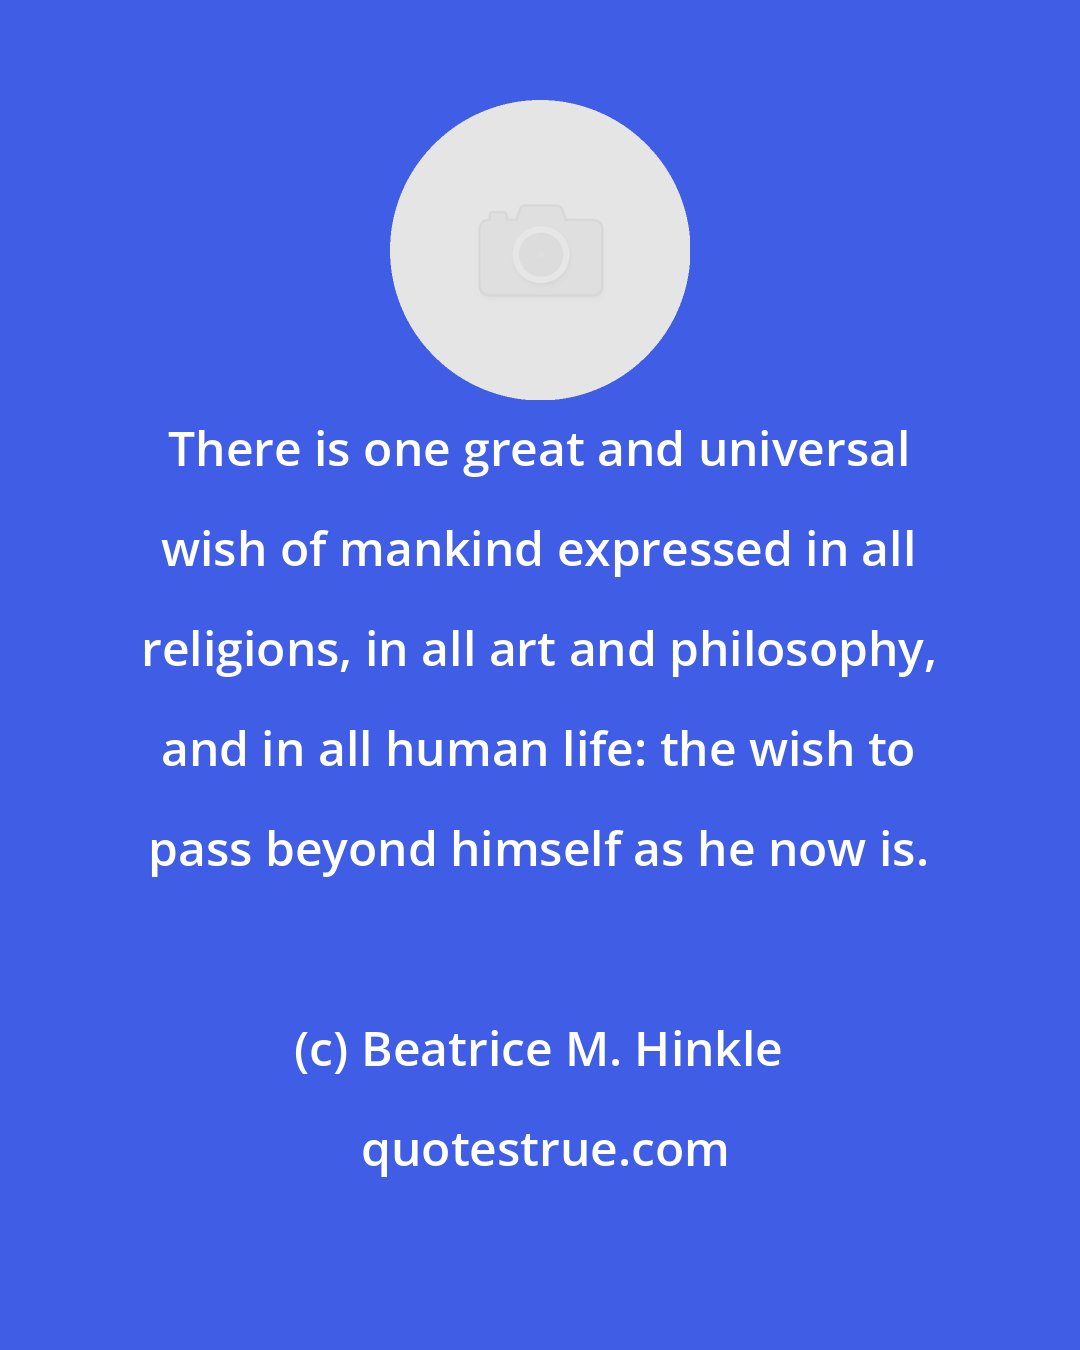 Beatrice M. Hinkle: There is one great and universal wish of mankind expressed in all religions, in all art and philosophy, and in all human life: the wish to pass beyond himself as he now is.